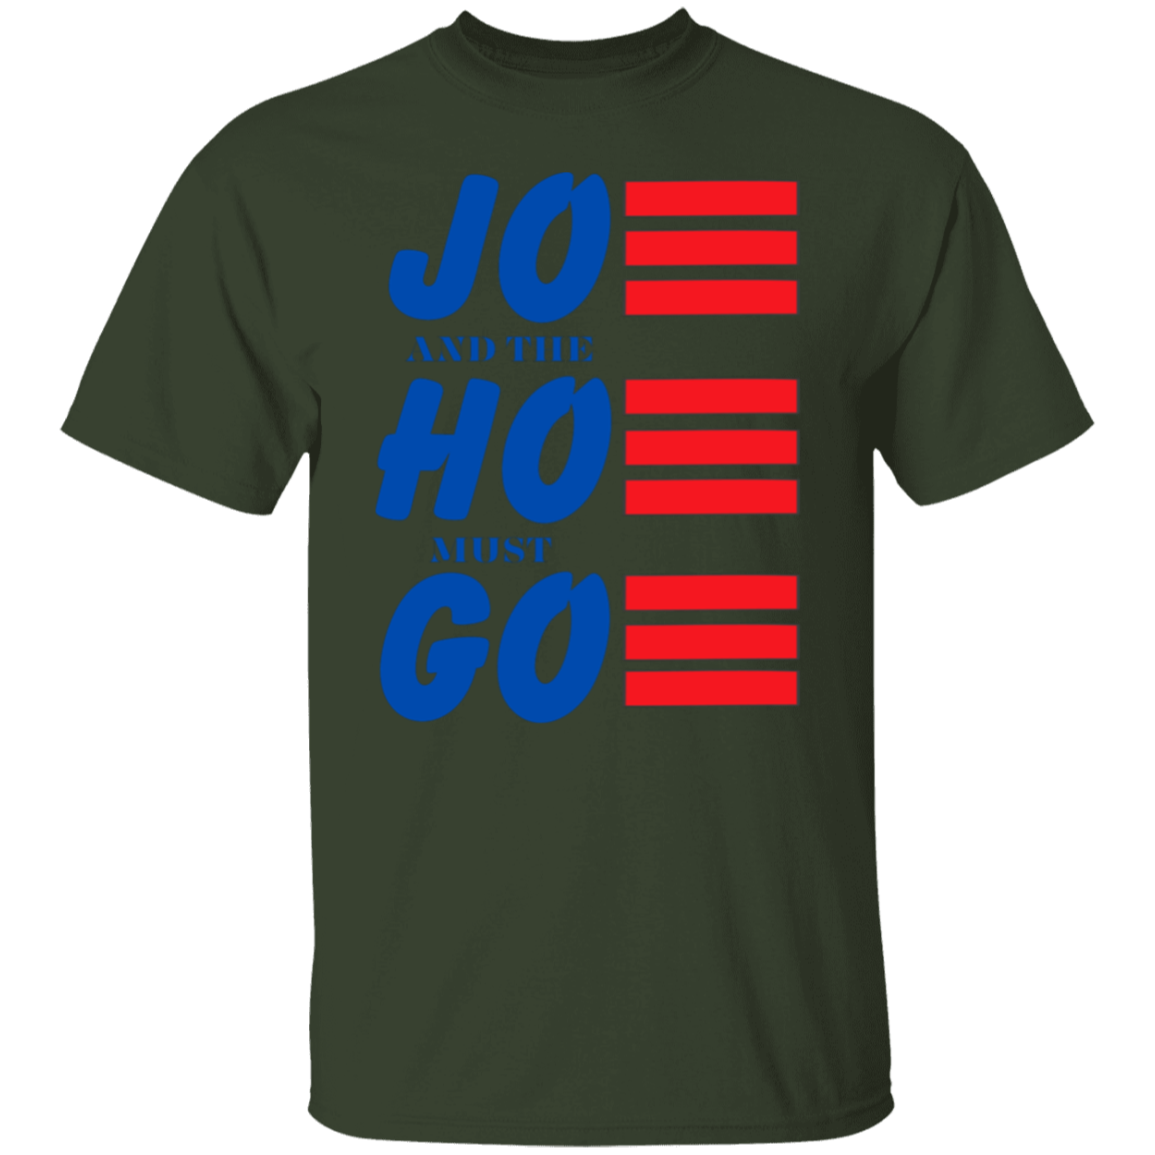 Jo and the Ho Must Go Tshirt